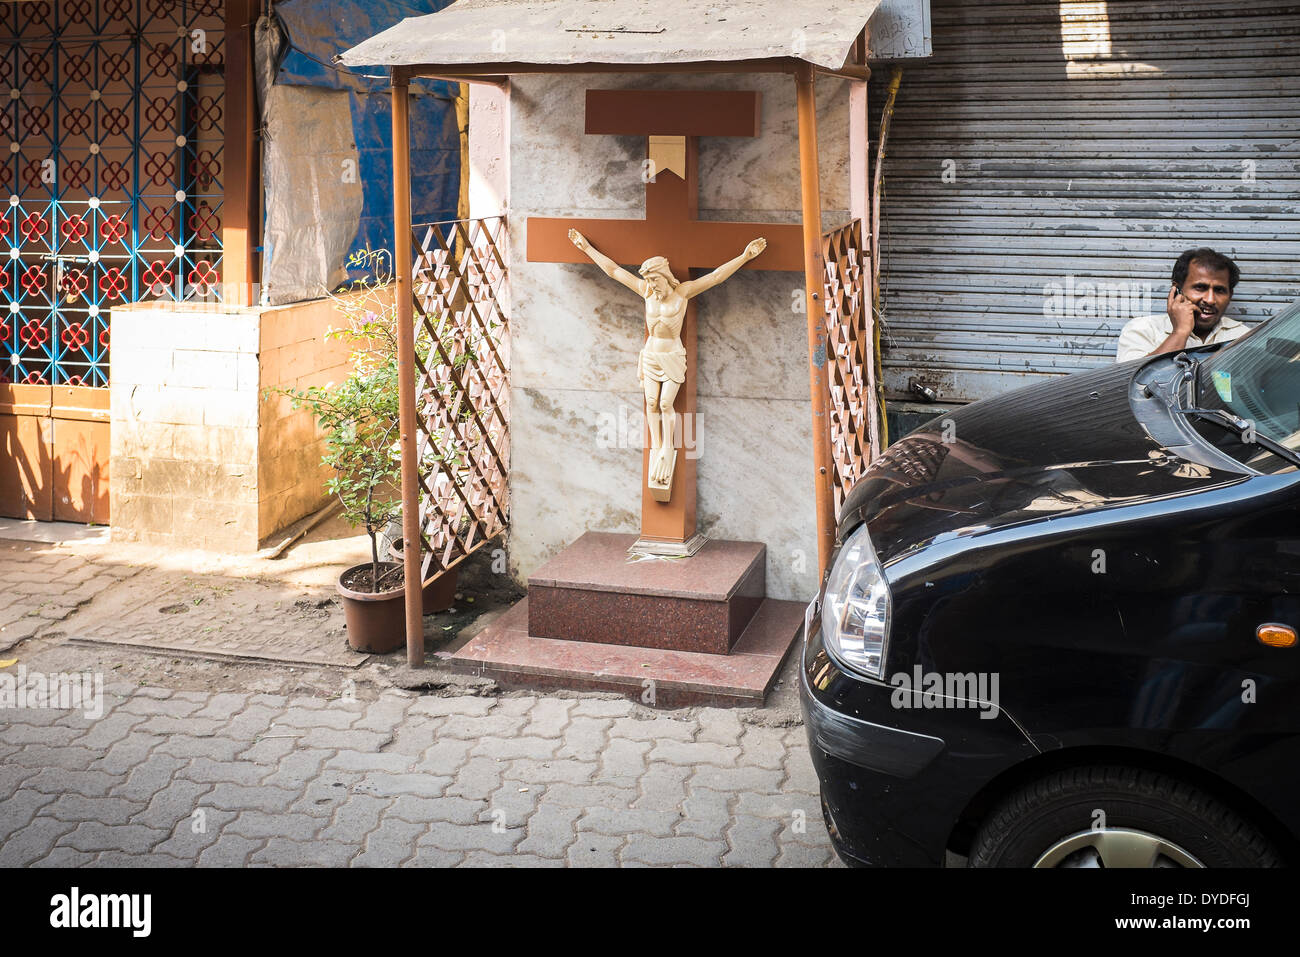 A man talks on his mobile phone outside a shuttered shop next to a small shrine to Jesus Christ. Stock Photo